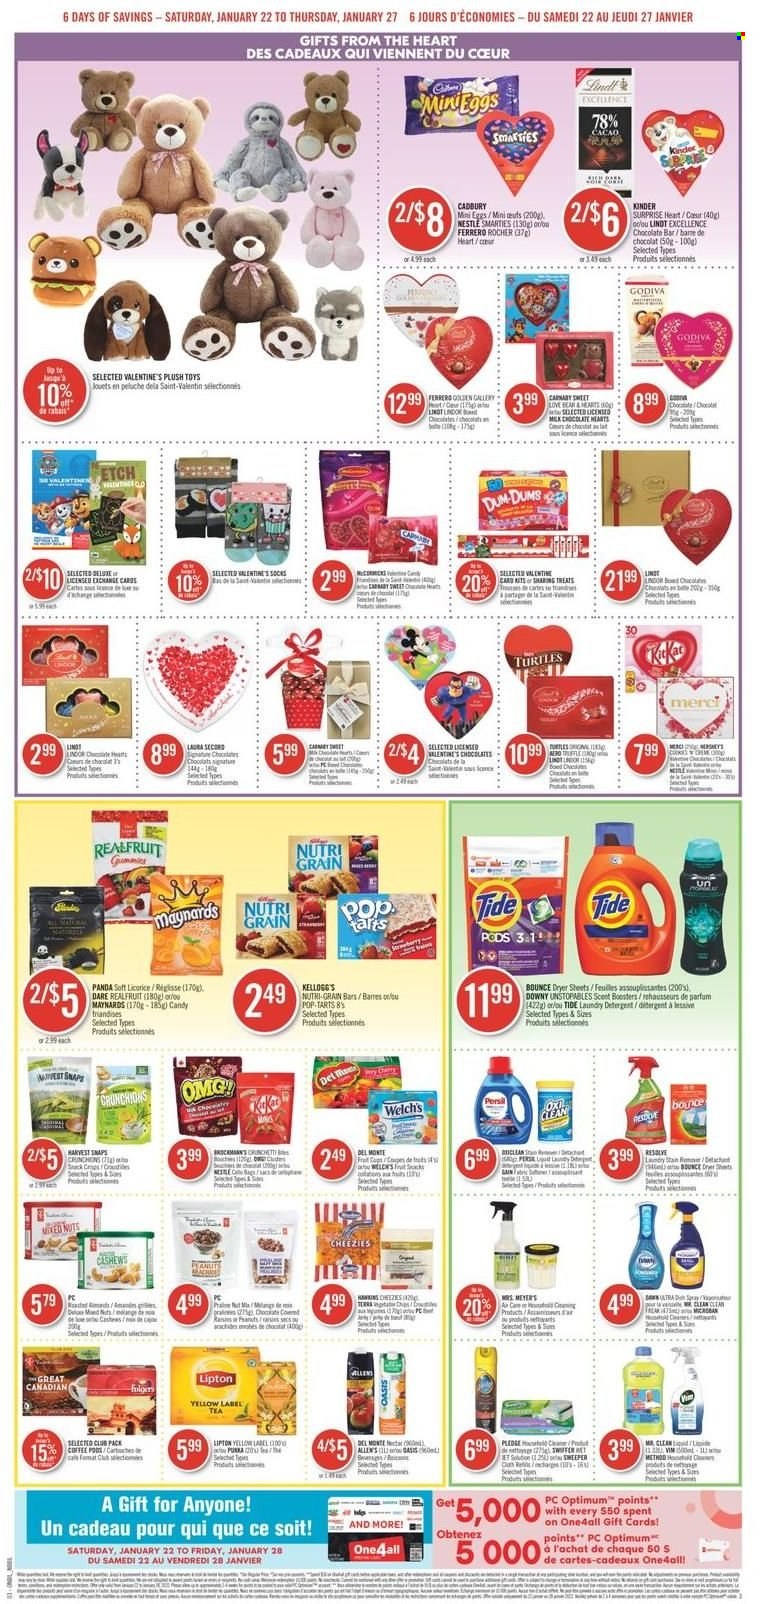 thumbnail - Shoppers Drug Mart Flyer - January 22, 2022 - January 27, 2022 - Sales products - milk chocolate, snack, Kinder Surprise, truffles, Godiva, Kellogg's, Cadbury, Merci, Pop-Tarts, Welch's, chocolate bar, Harvest Snaps, Nutri-Grain, cashews, peanuts, mixed nuts, tea, coffee pods, Folgers, Pledge, Tide, Unstopables, laundry detergent, Bounce, dryer sheets, scent booster, socks, tote, Nestlé, detergent, Lipton, Lindt, Ferrero Rocher, Smarties. Page 3.